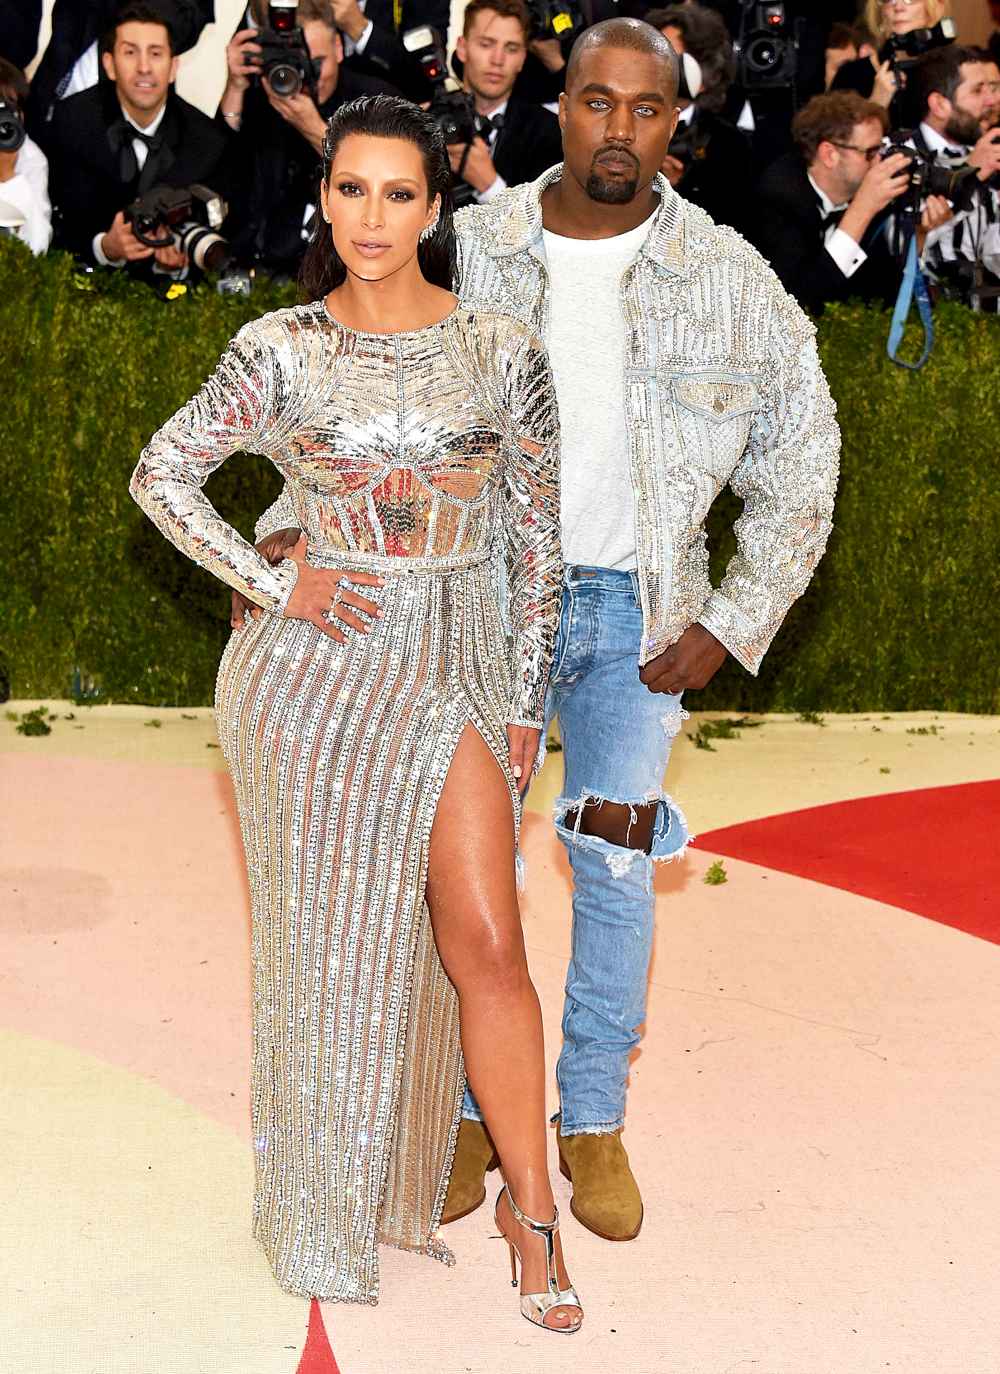 Kim Kardashian and Kanye West attend the 'Manus x Machina: Fashion In An Age Of Technology' Costume Institute Gala at Metropolitan Museum of Art on May 2, 2016 in New York City.